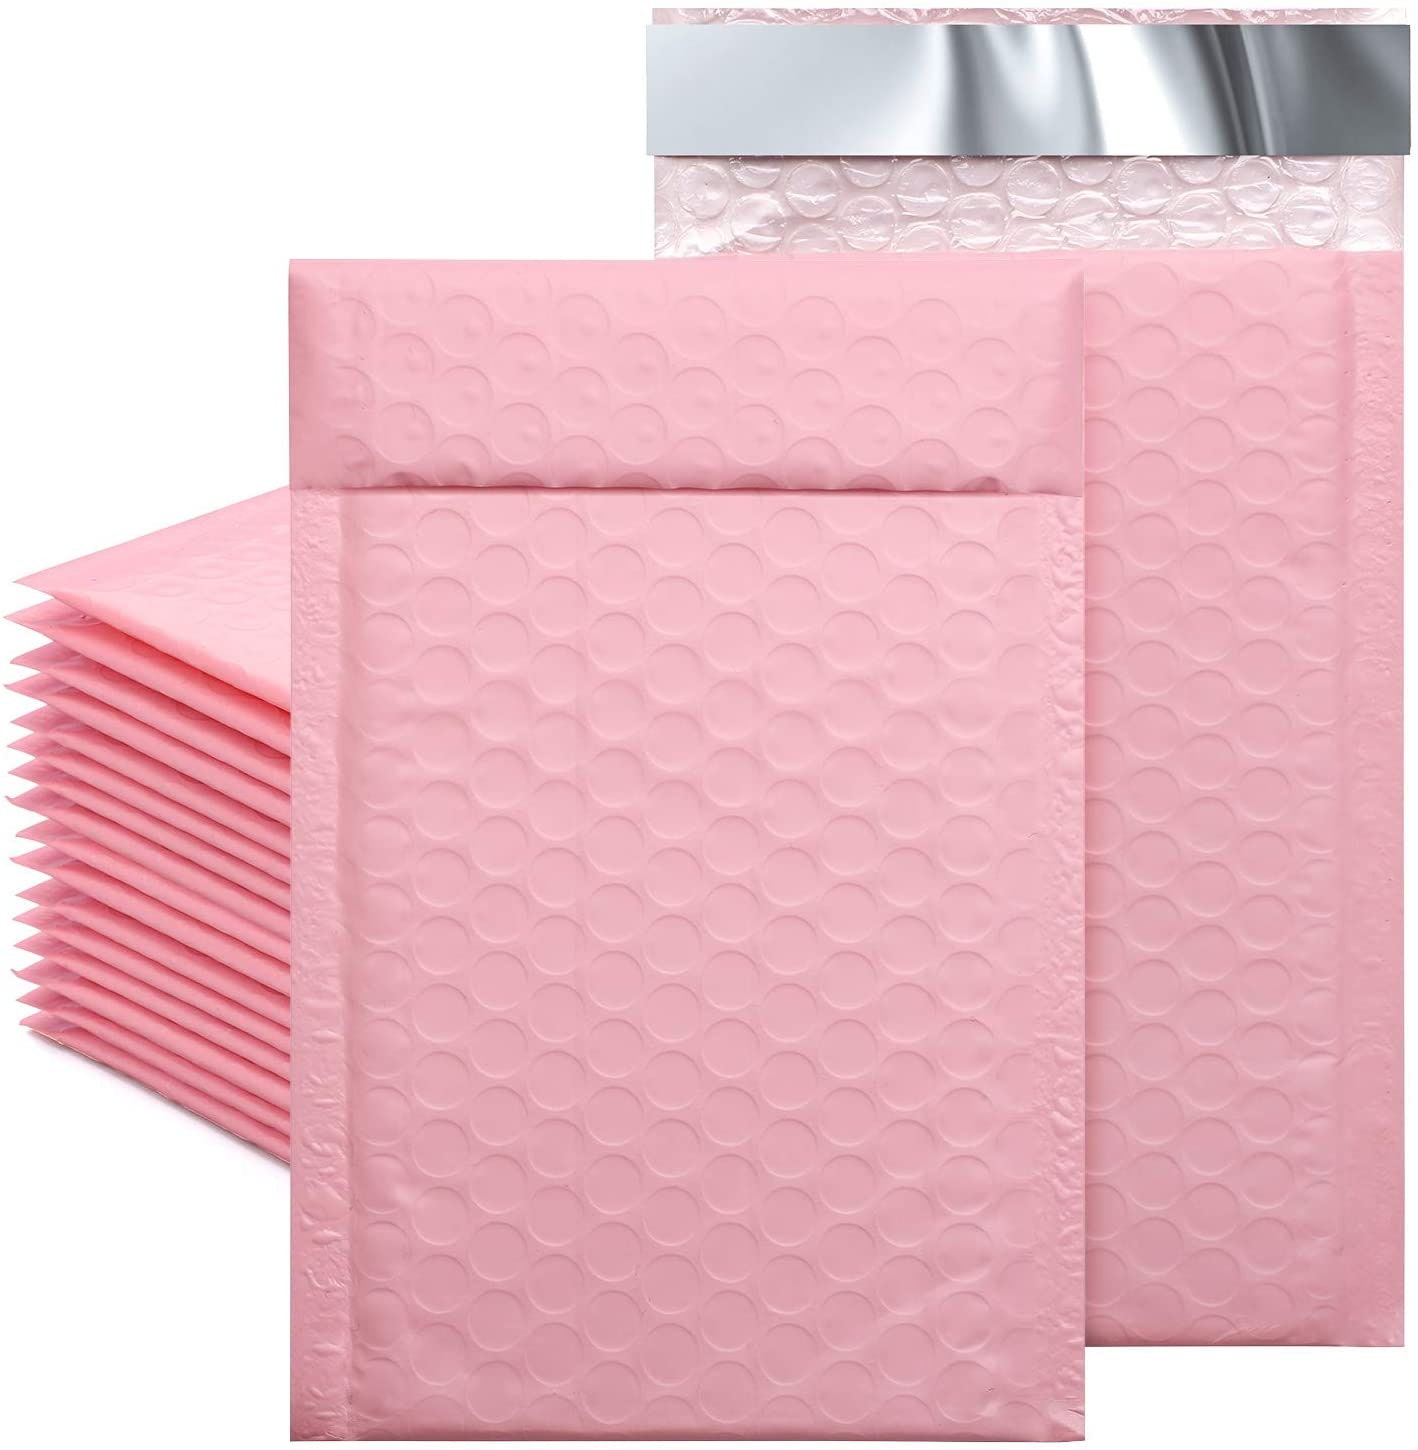 Fu Global Upgrade Opaque Pink #000 Poly Bubble Mailer Self Seal Padded Envelopes Pack of 50 Pink, 4x8 